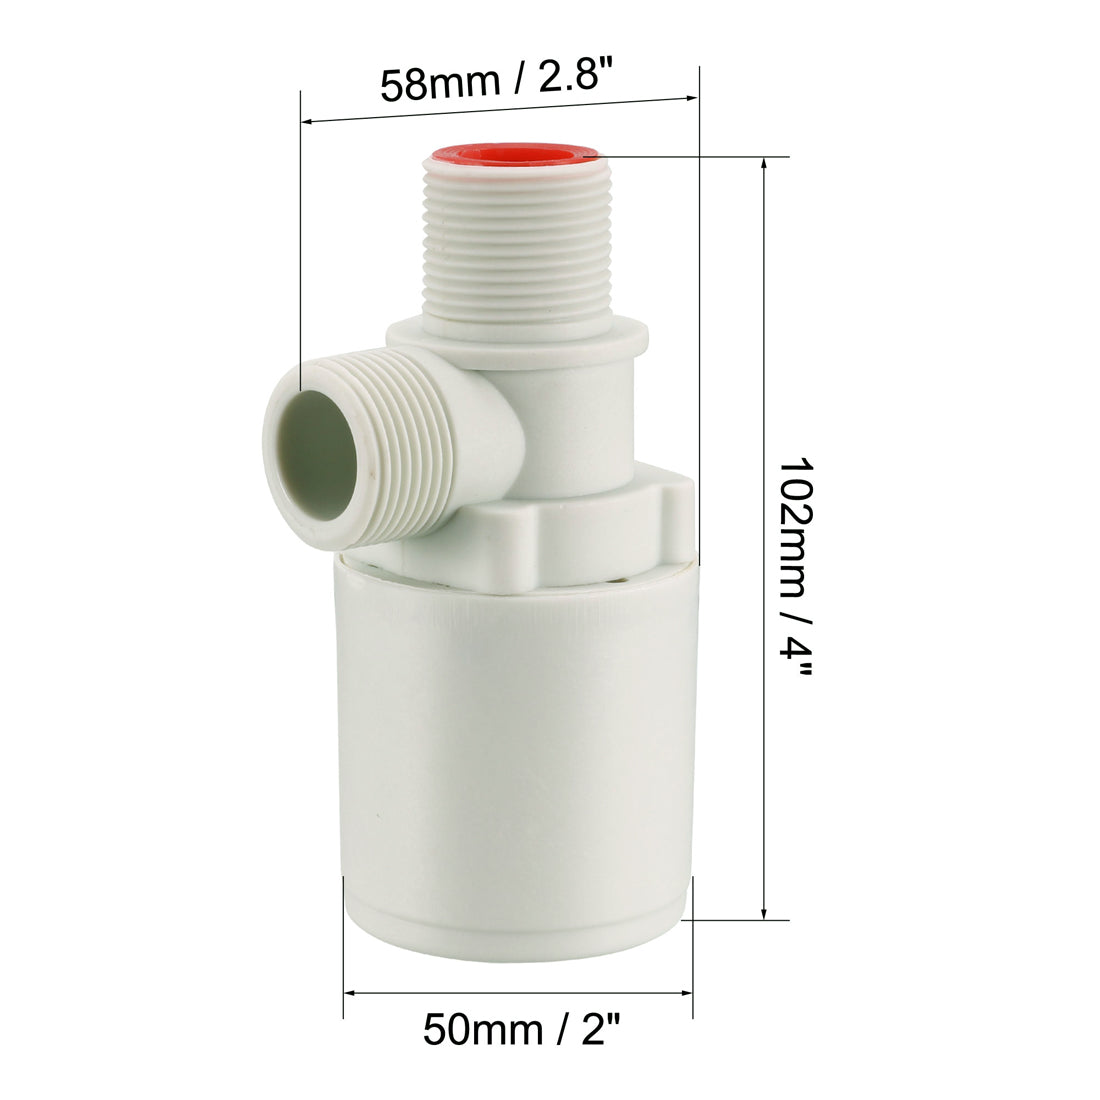 uxcell Uxcell Float Ball Valve G3/4 Thread Plastic Vertical Water Liquid Level Control Sensor Automatic with Filter